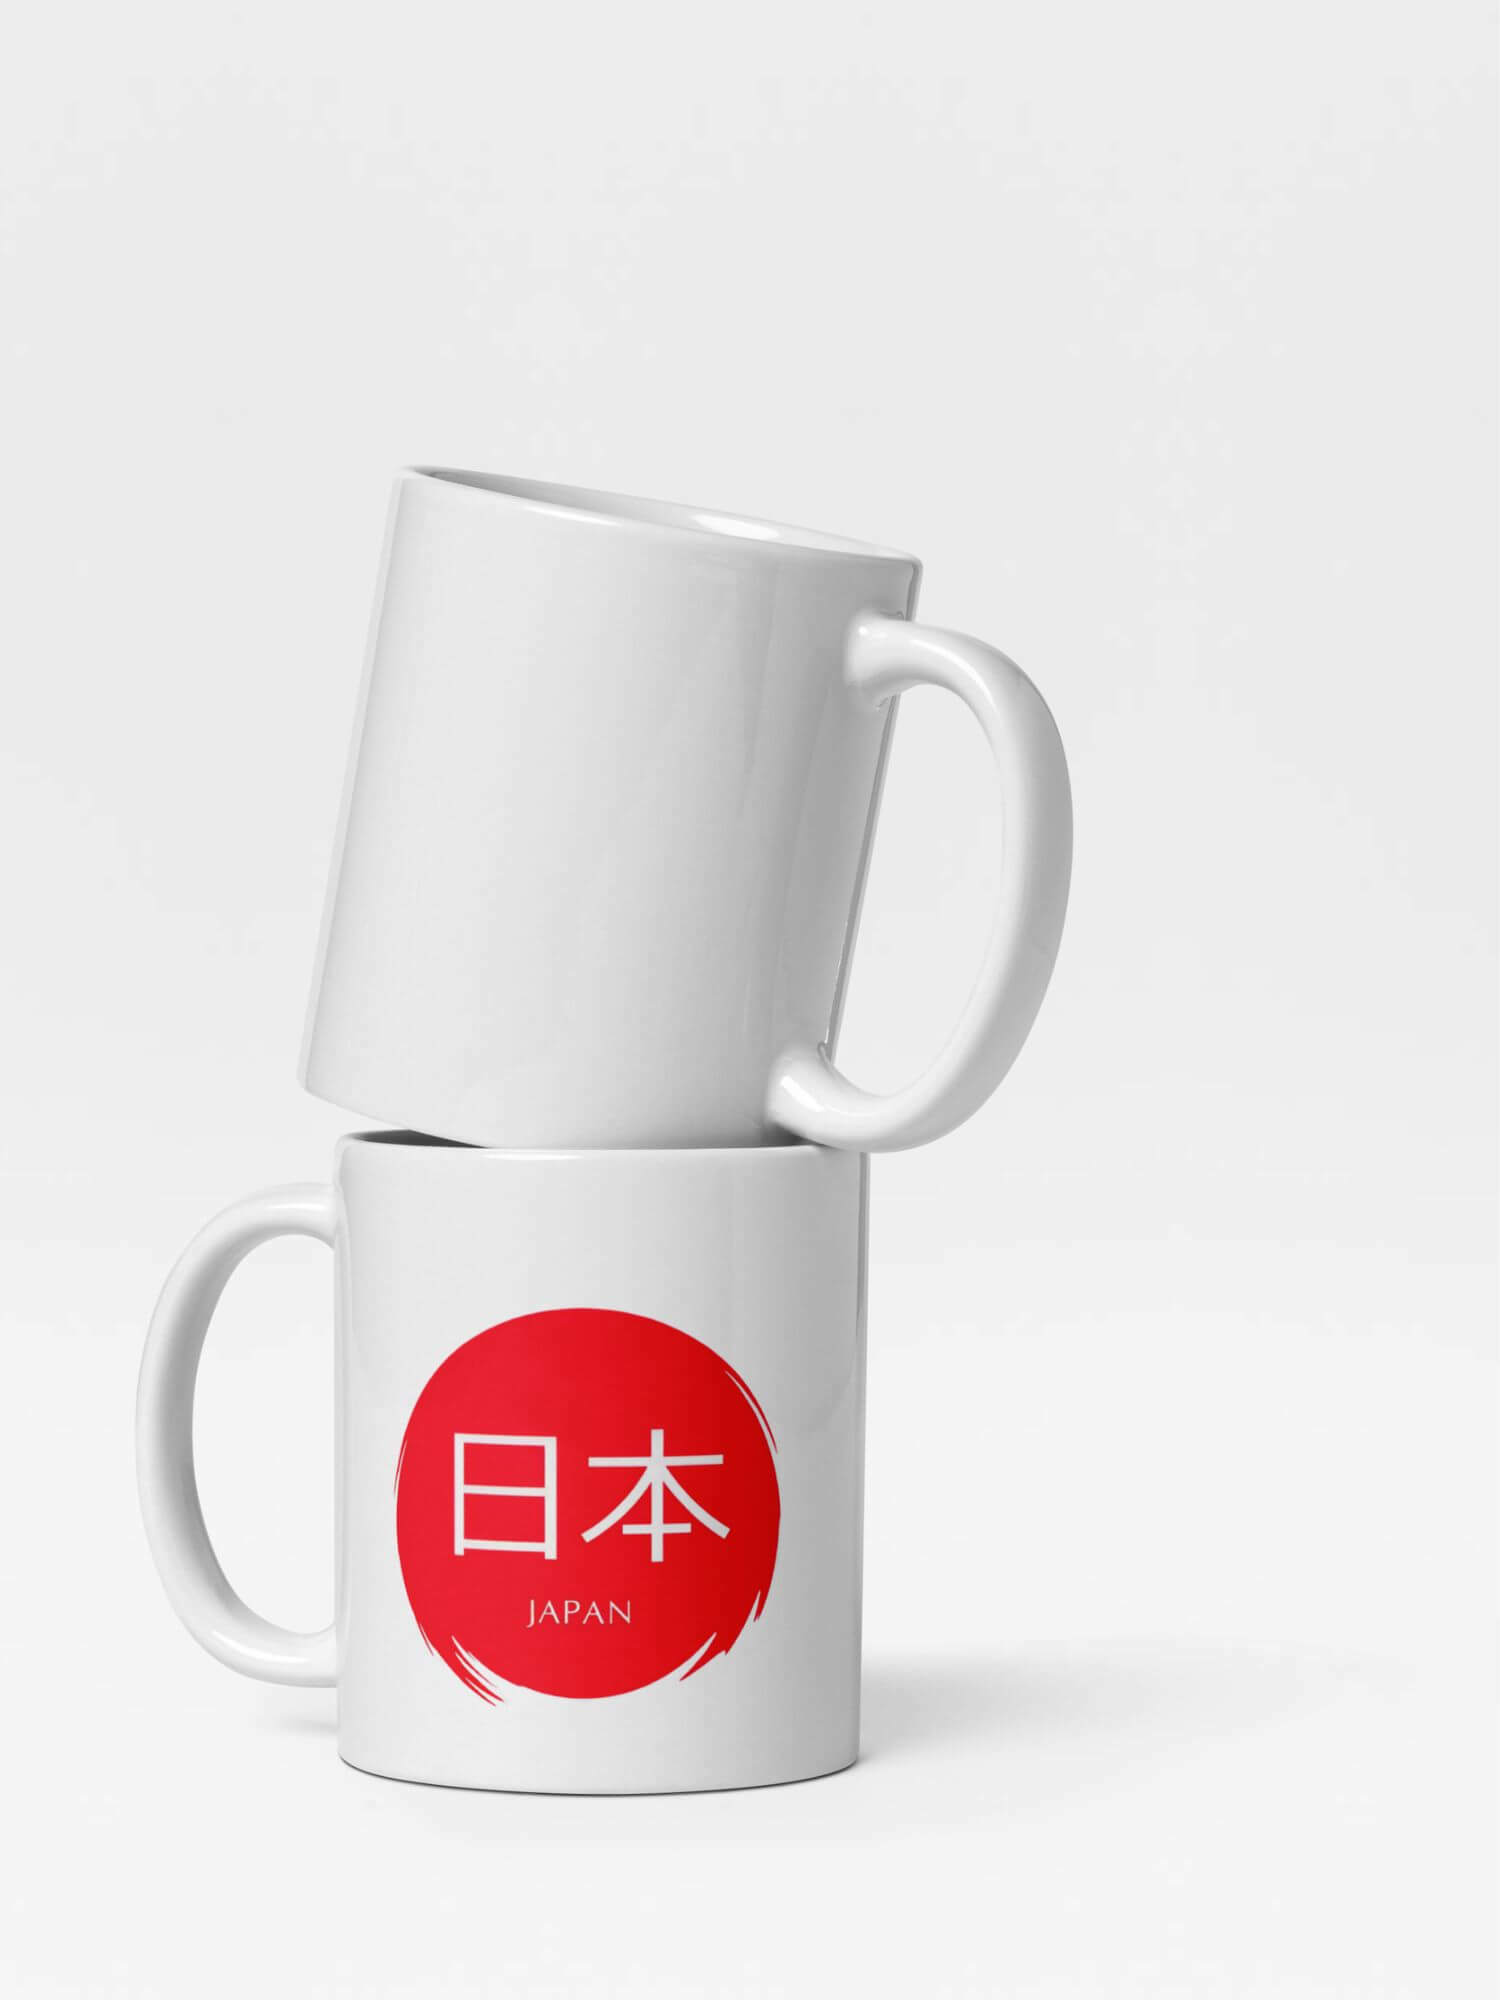 Glossy Japan Mug    Japanese country design drinks cup coffee, tea, juice, milk drinking cups miteigi-Logo branded product item tumblers ceramics cartoon pattern in white with red design collections Japan nippon JPN Nihon cities souvenirs collectors mugs